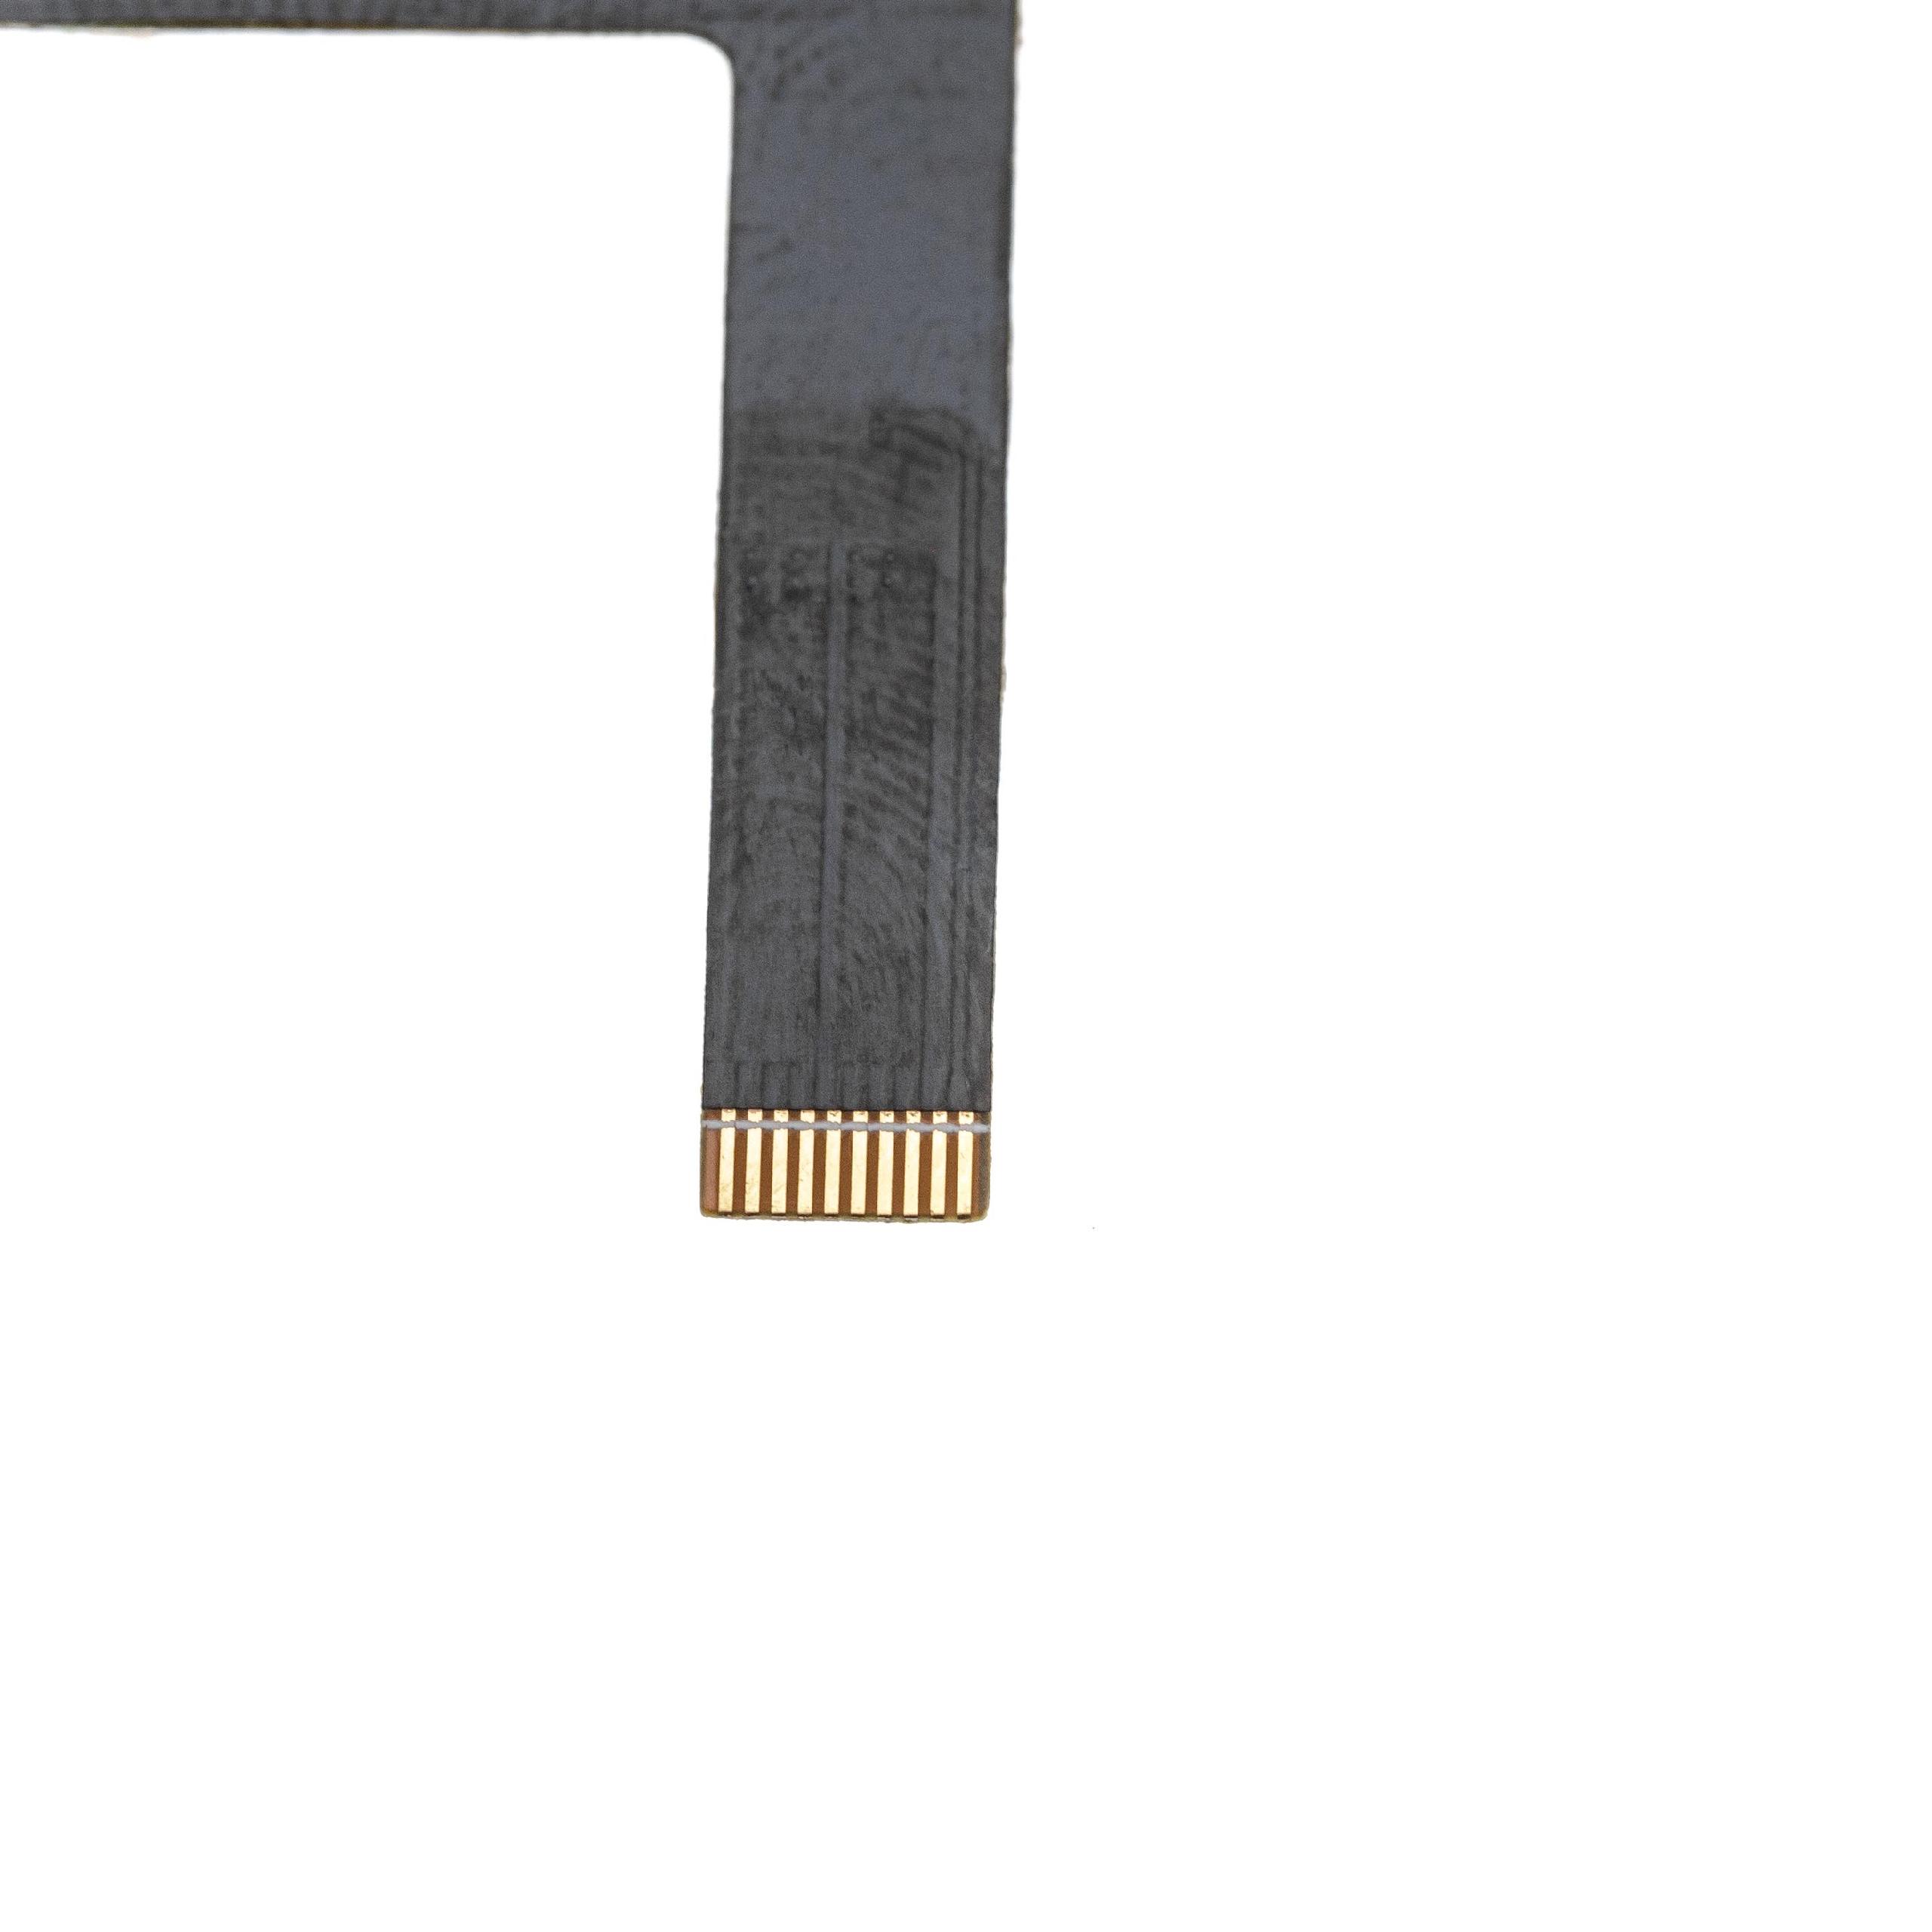 Ribbon Flex Cable suitable for DJI Phantom 3 Advanced, 3 Pro Drone, Gimbal Part No 49 - with double-sided tape